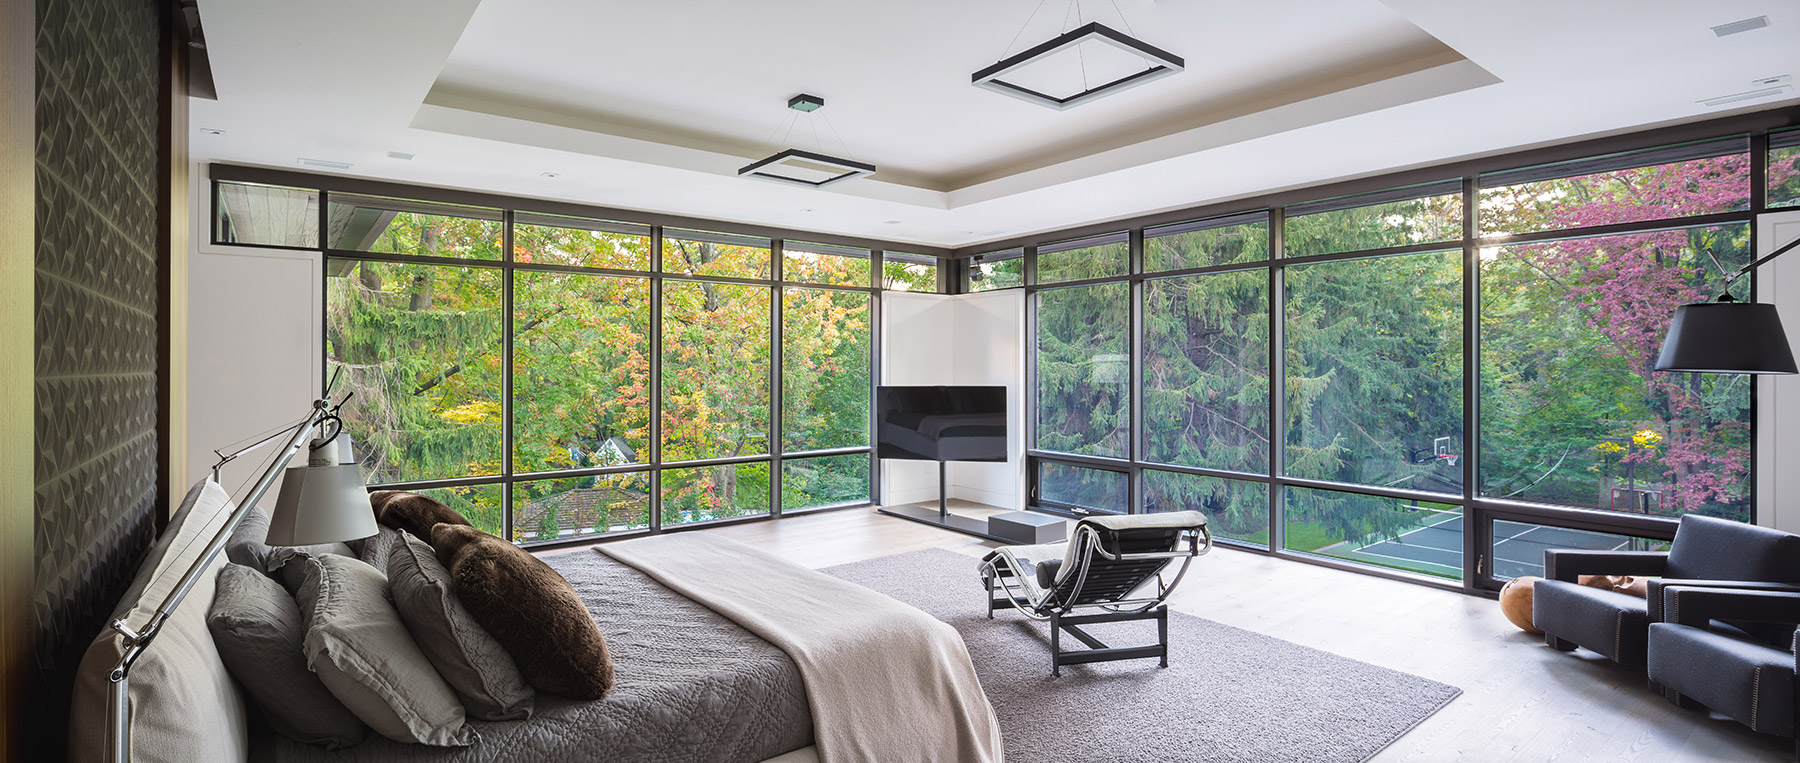 Modern master bedroom with floor to ceiling windows, recessed ceiling and hardwood flooring.